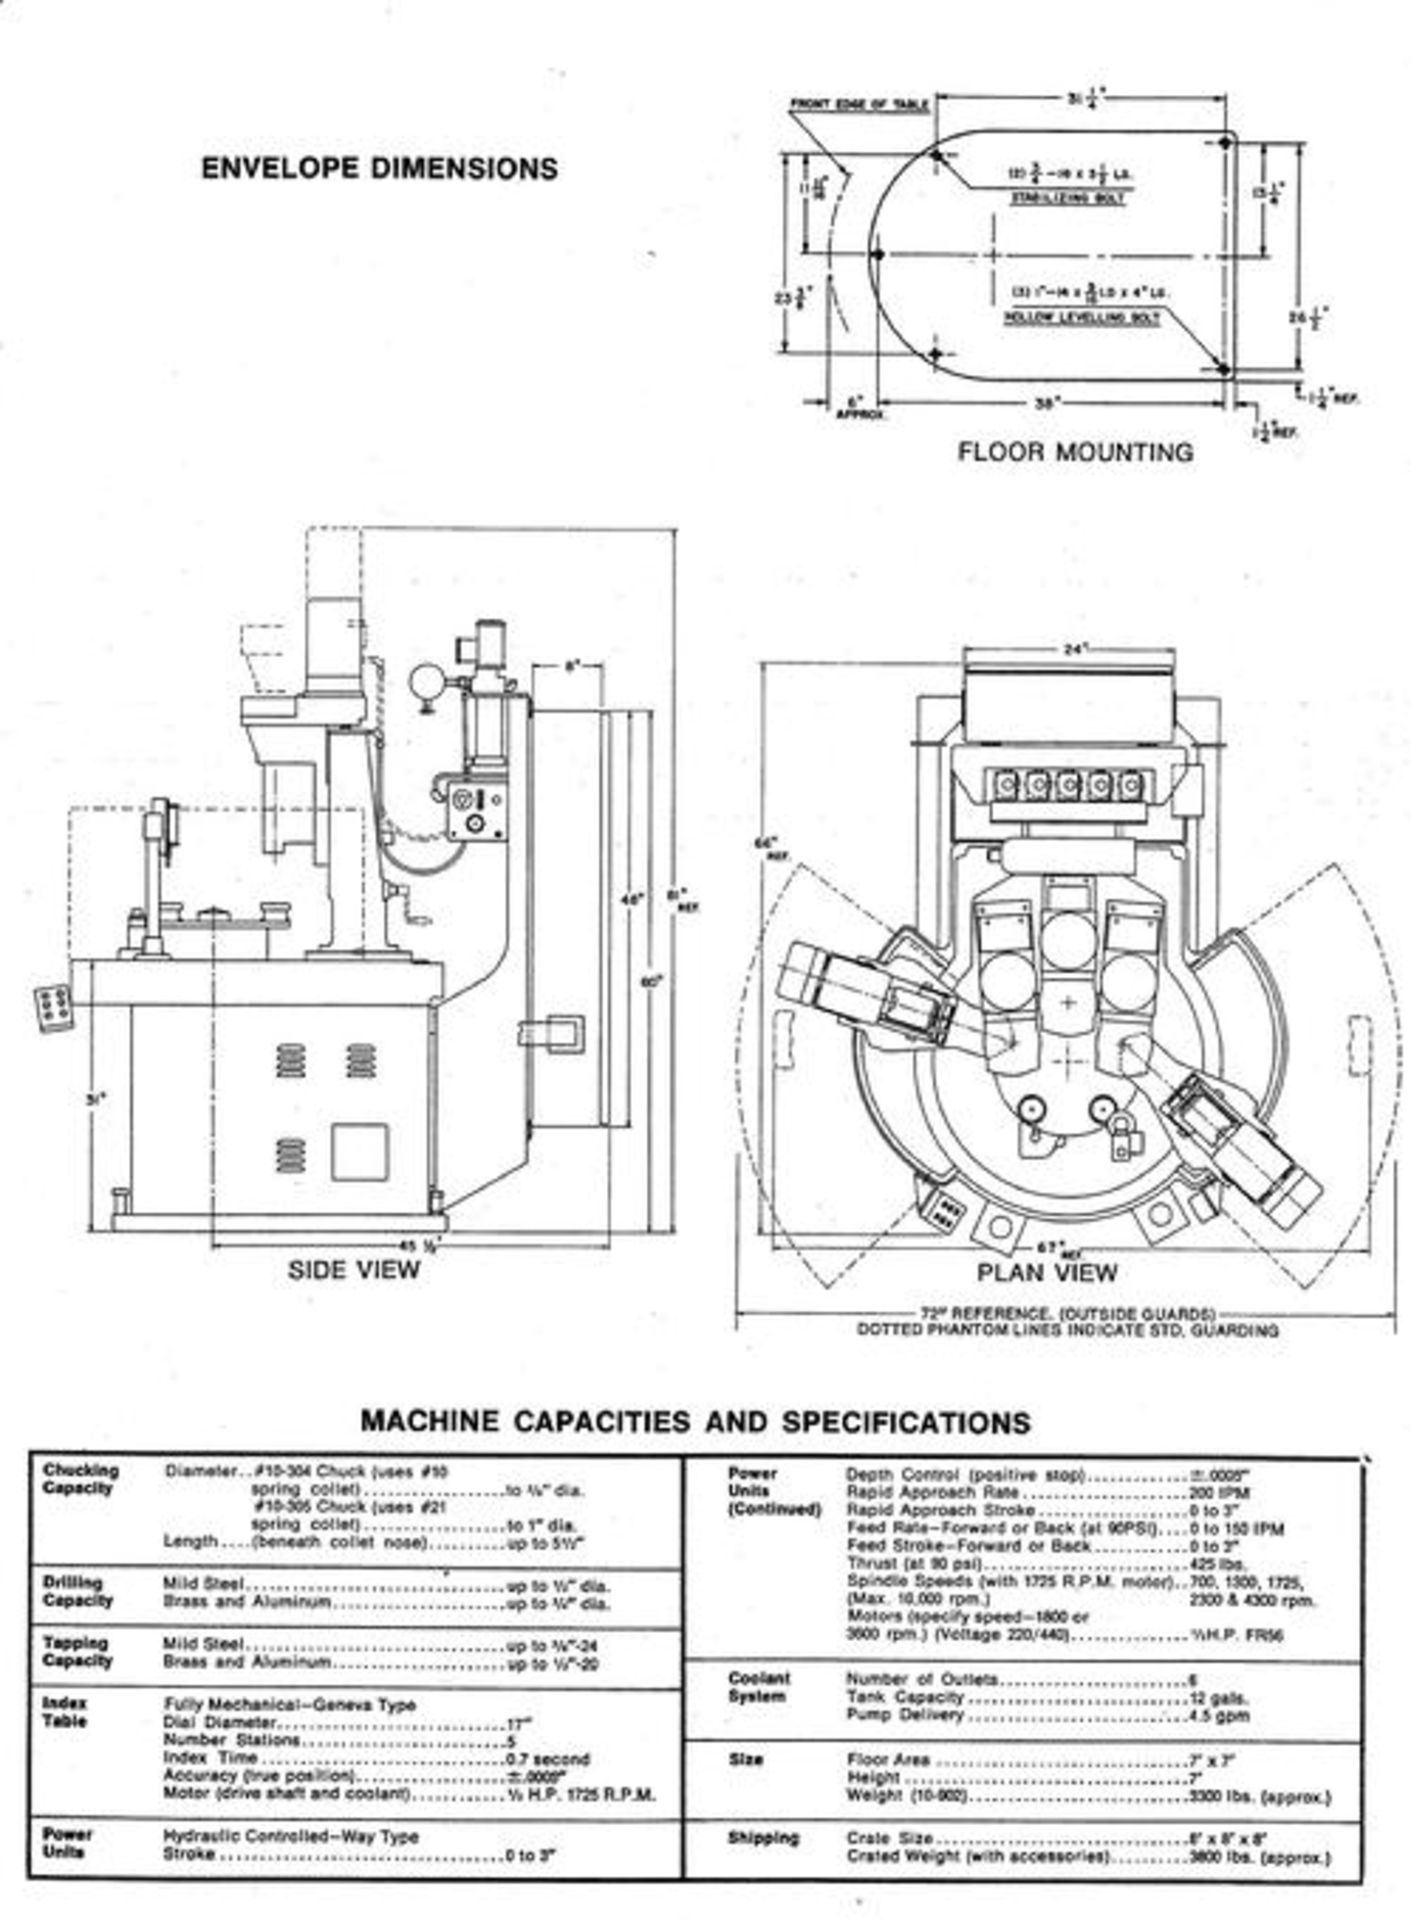 MSO DAVENPORT 5-SPINDLE MULTIPLE SECONDAY OPERATION ROTARY TRANSFER MACHINE, S/N 9531538, NEW 1995 - Image 9 of 9